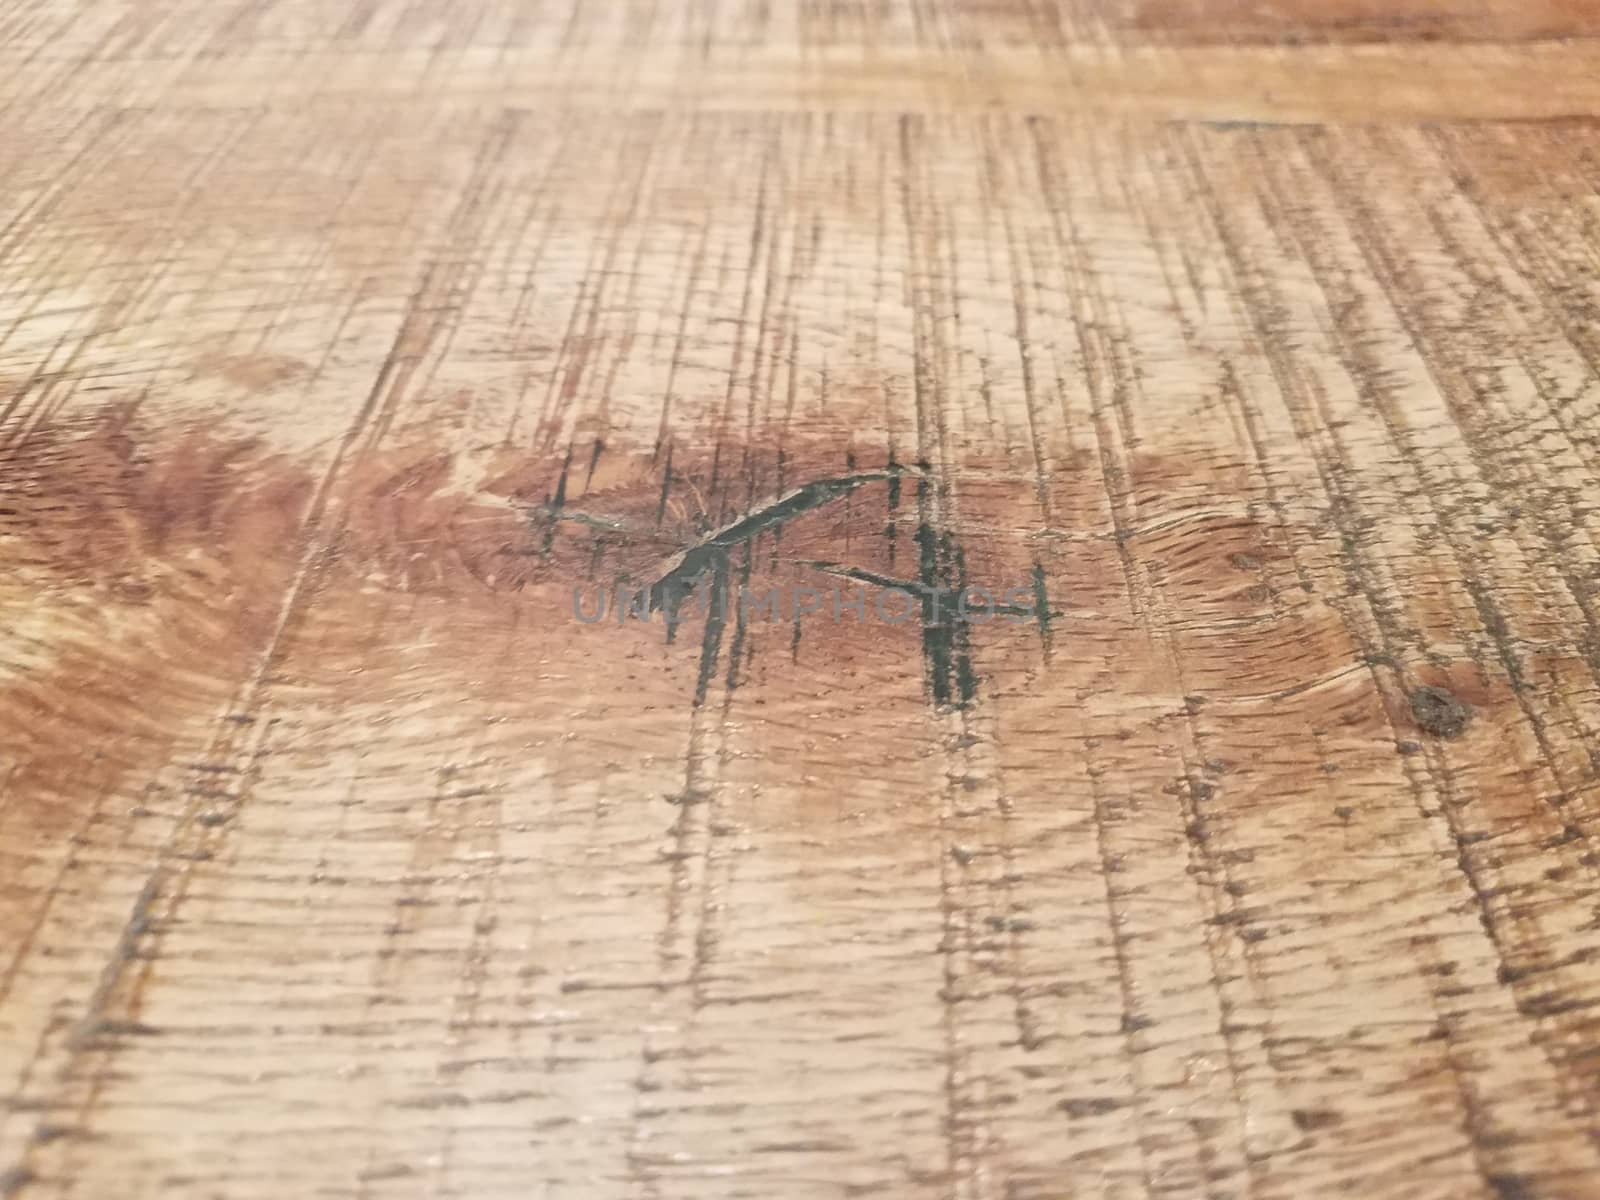 worn or weathered brown wood table or surface up close